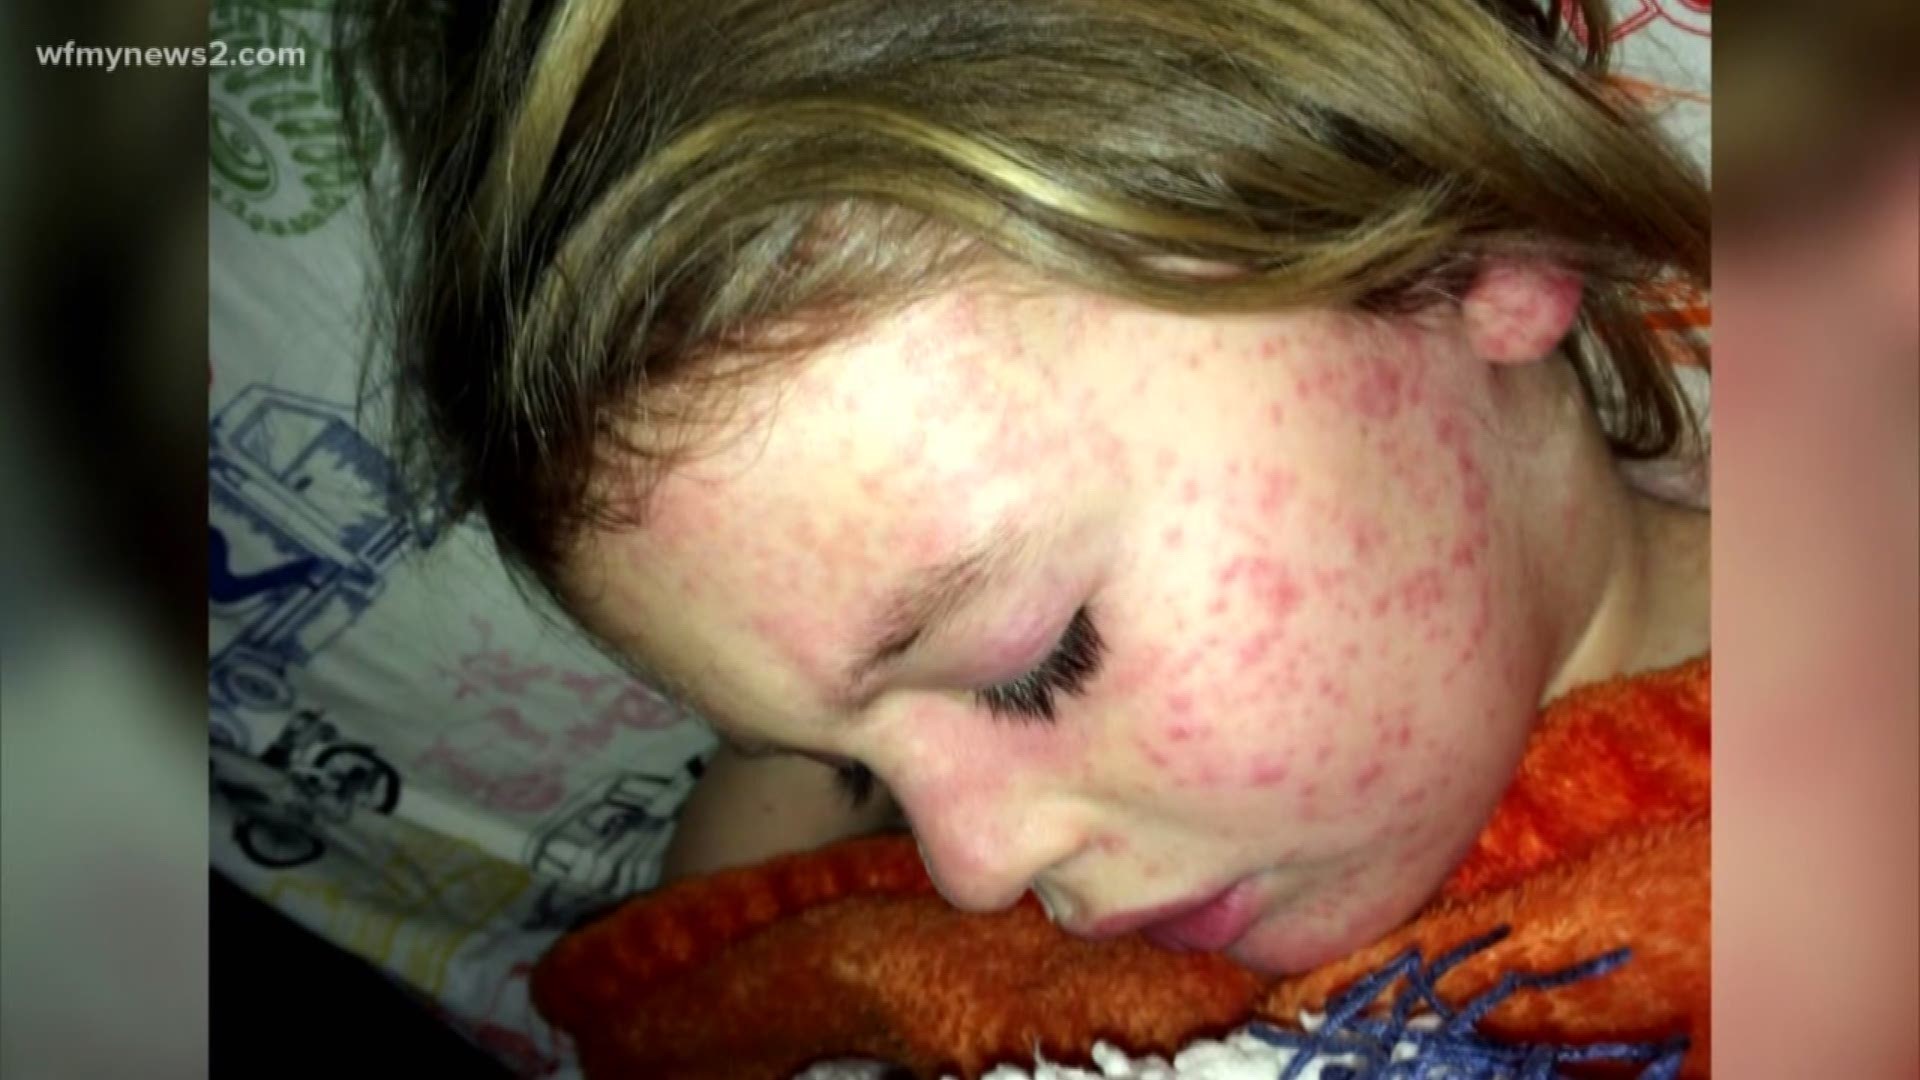 The CDC says measles cases have it a high in the U.S. after it declared the disease eliminated almost, in 2000.